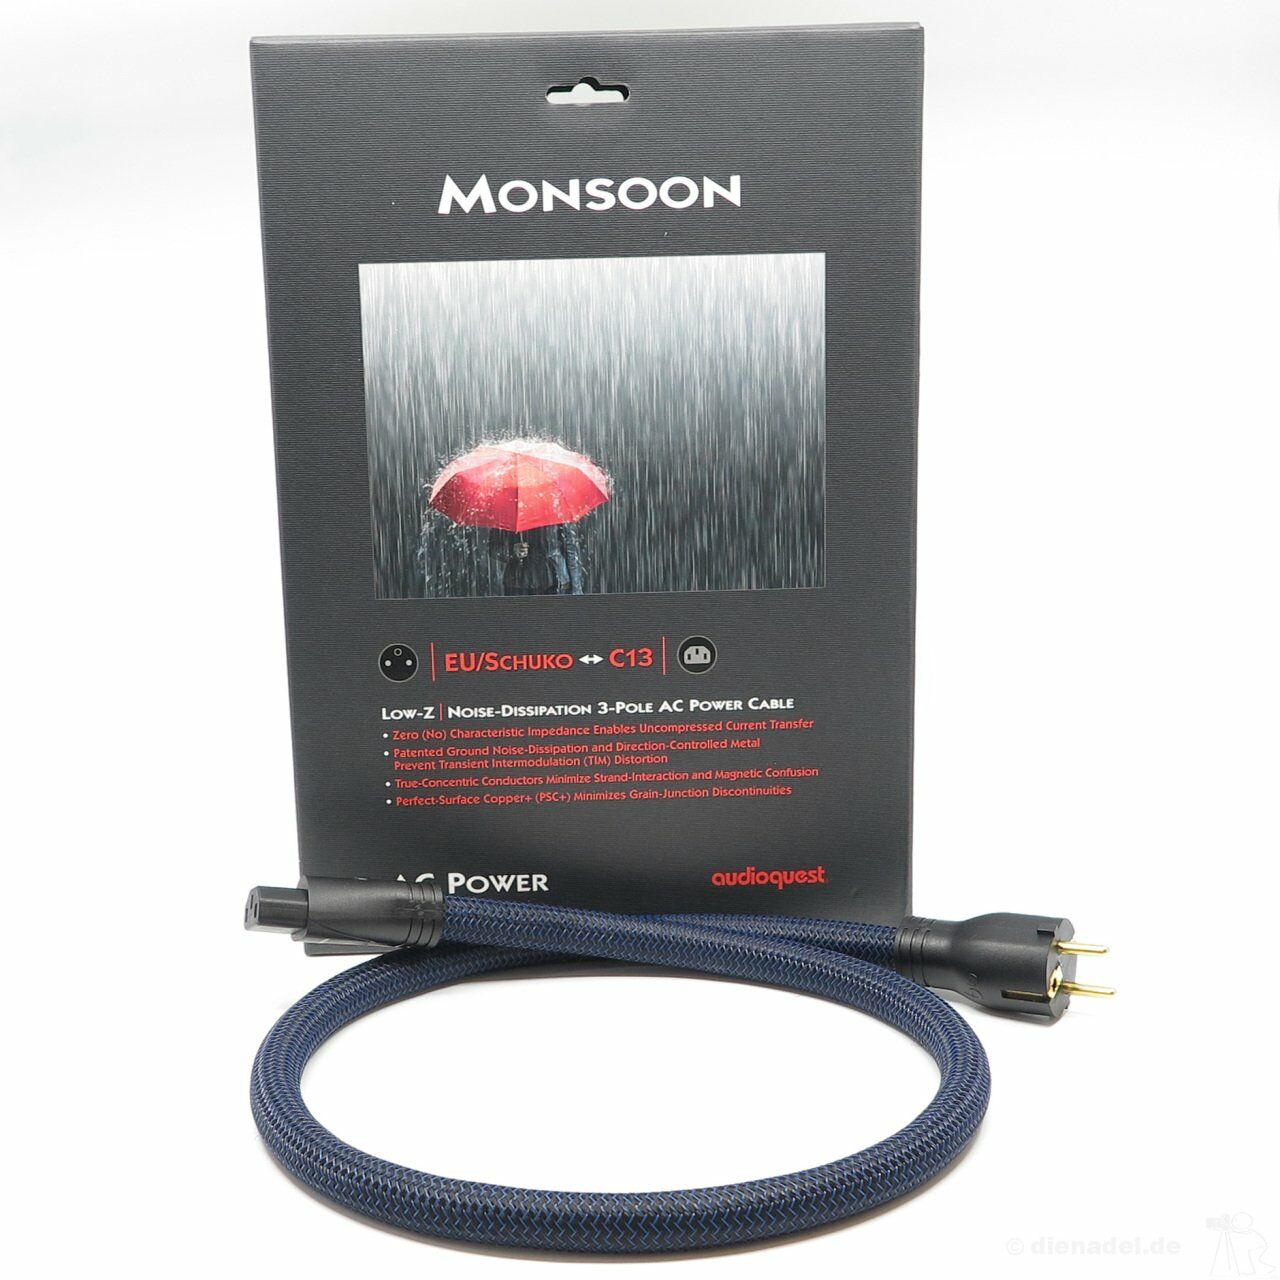 Audioquest Monsoon Power Cable 1mt